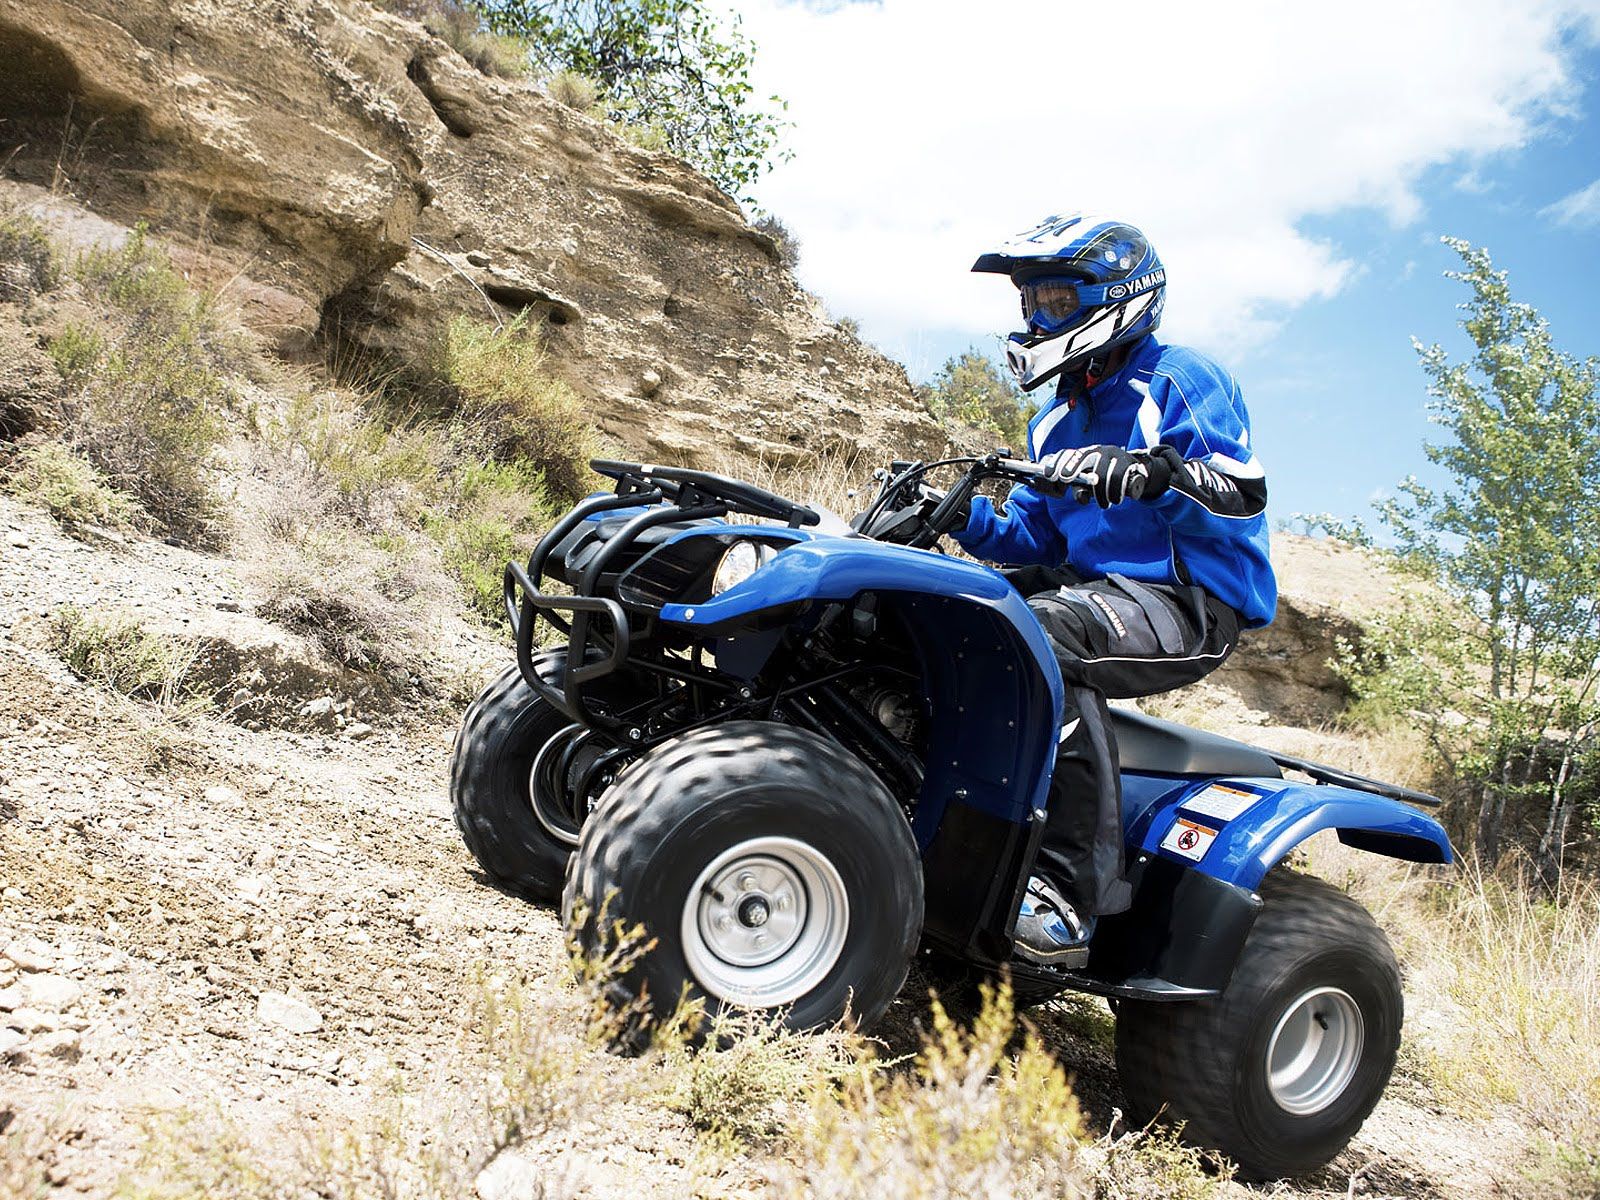 2009 YAMAHA Grizzly 125 ATV wallpapers, specifications